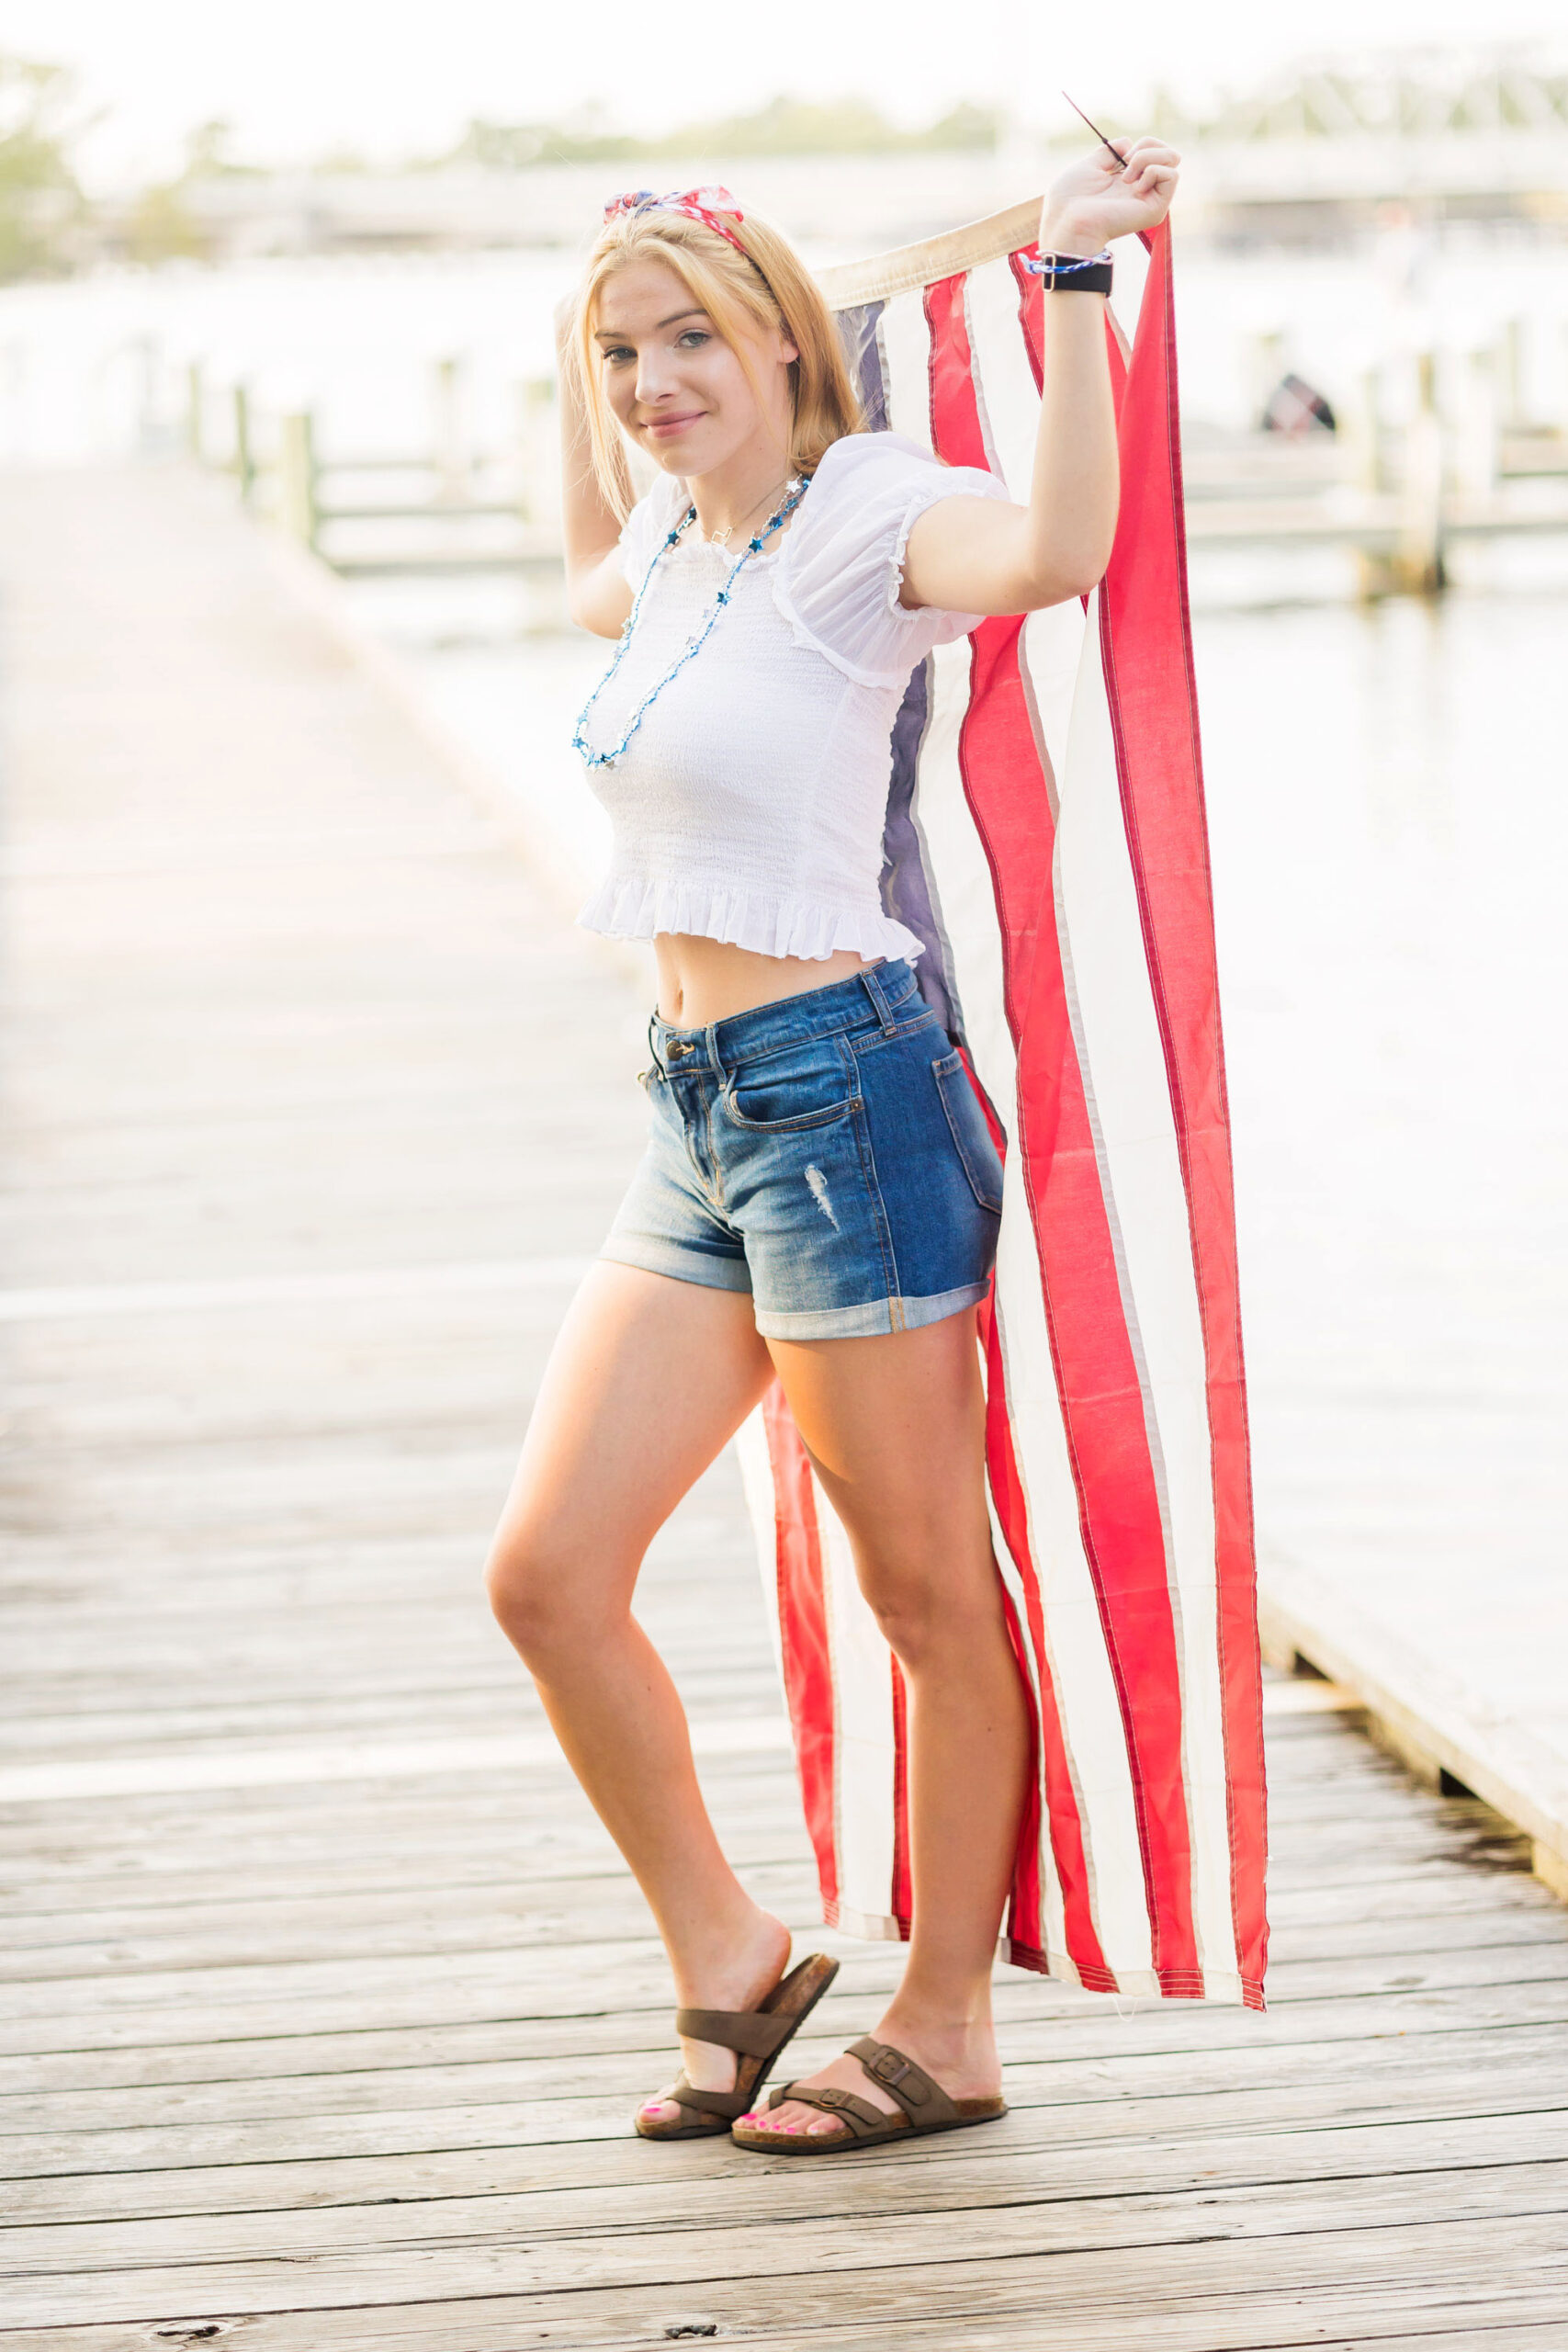 Hertford NC, 4th of July, red white, and blue , American, American flag, 4th of July rep team, class of 2024, America birthday day, Stars and Stripes, USA, senior portraits, senior girl outfits, senior rep team,NC senior photographer, seniors, Hertford NC senior photographer, Nags Head NC Senior Photographer